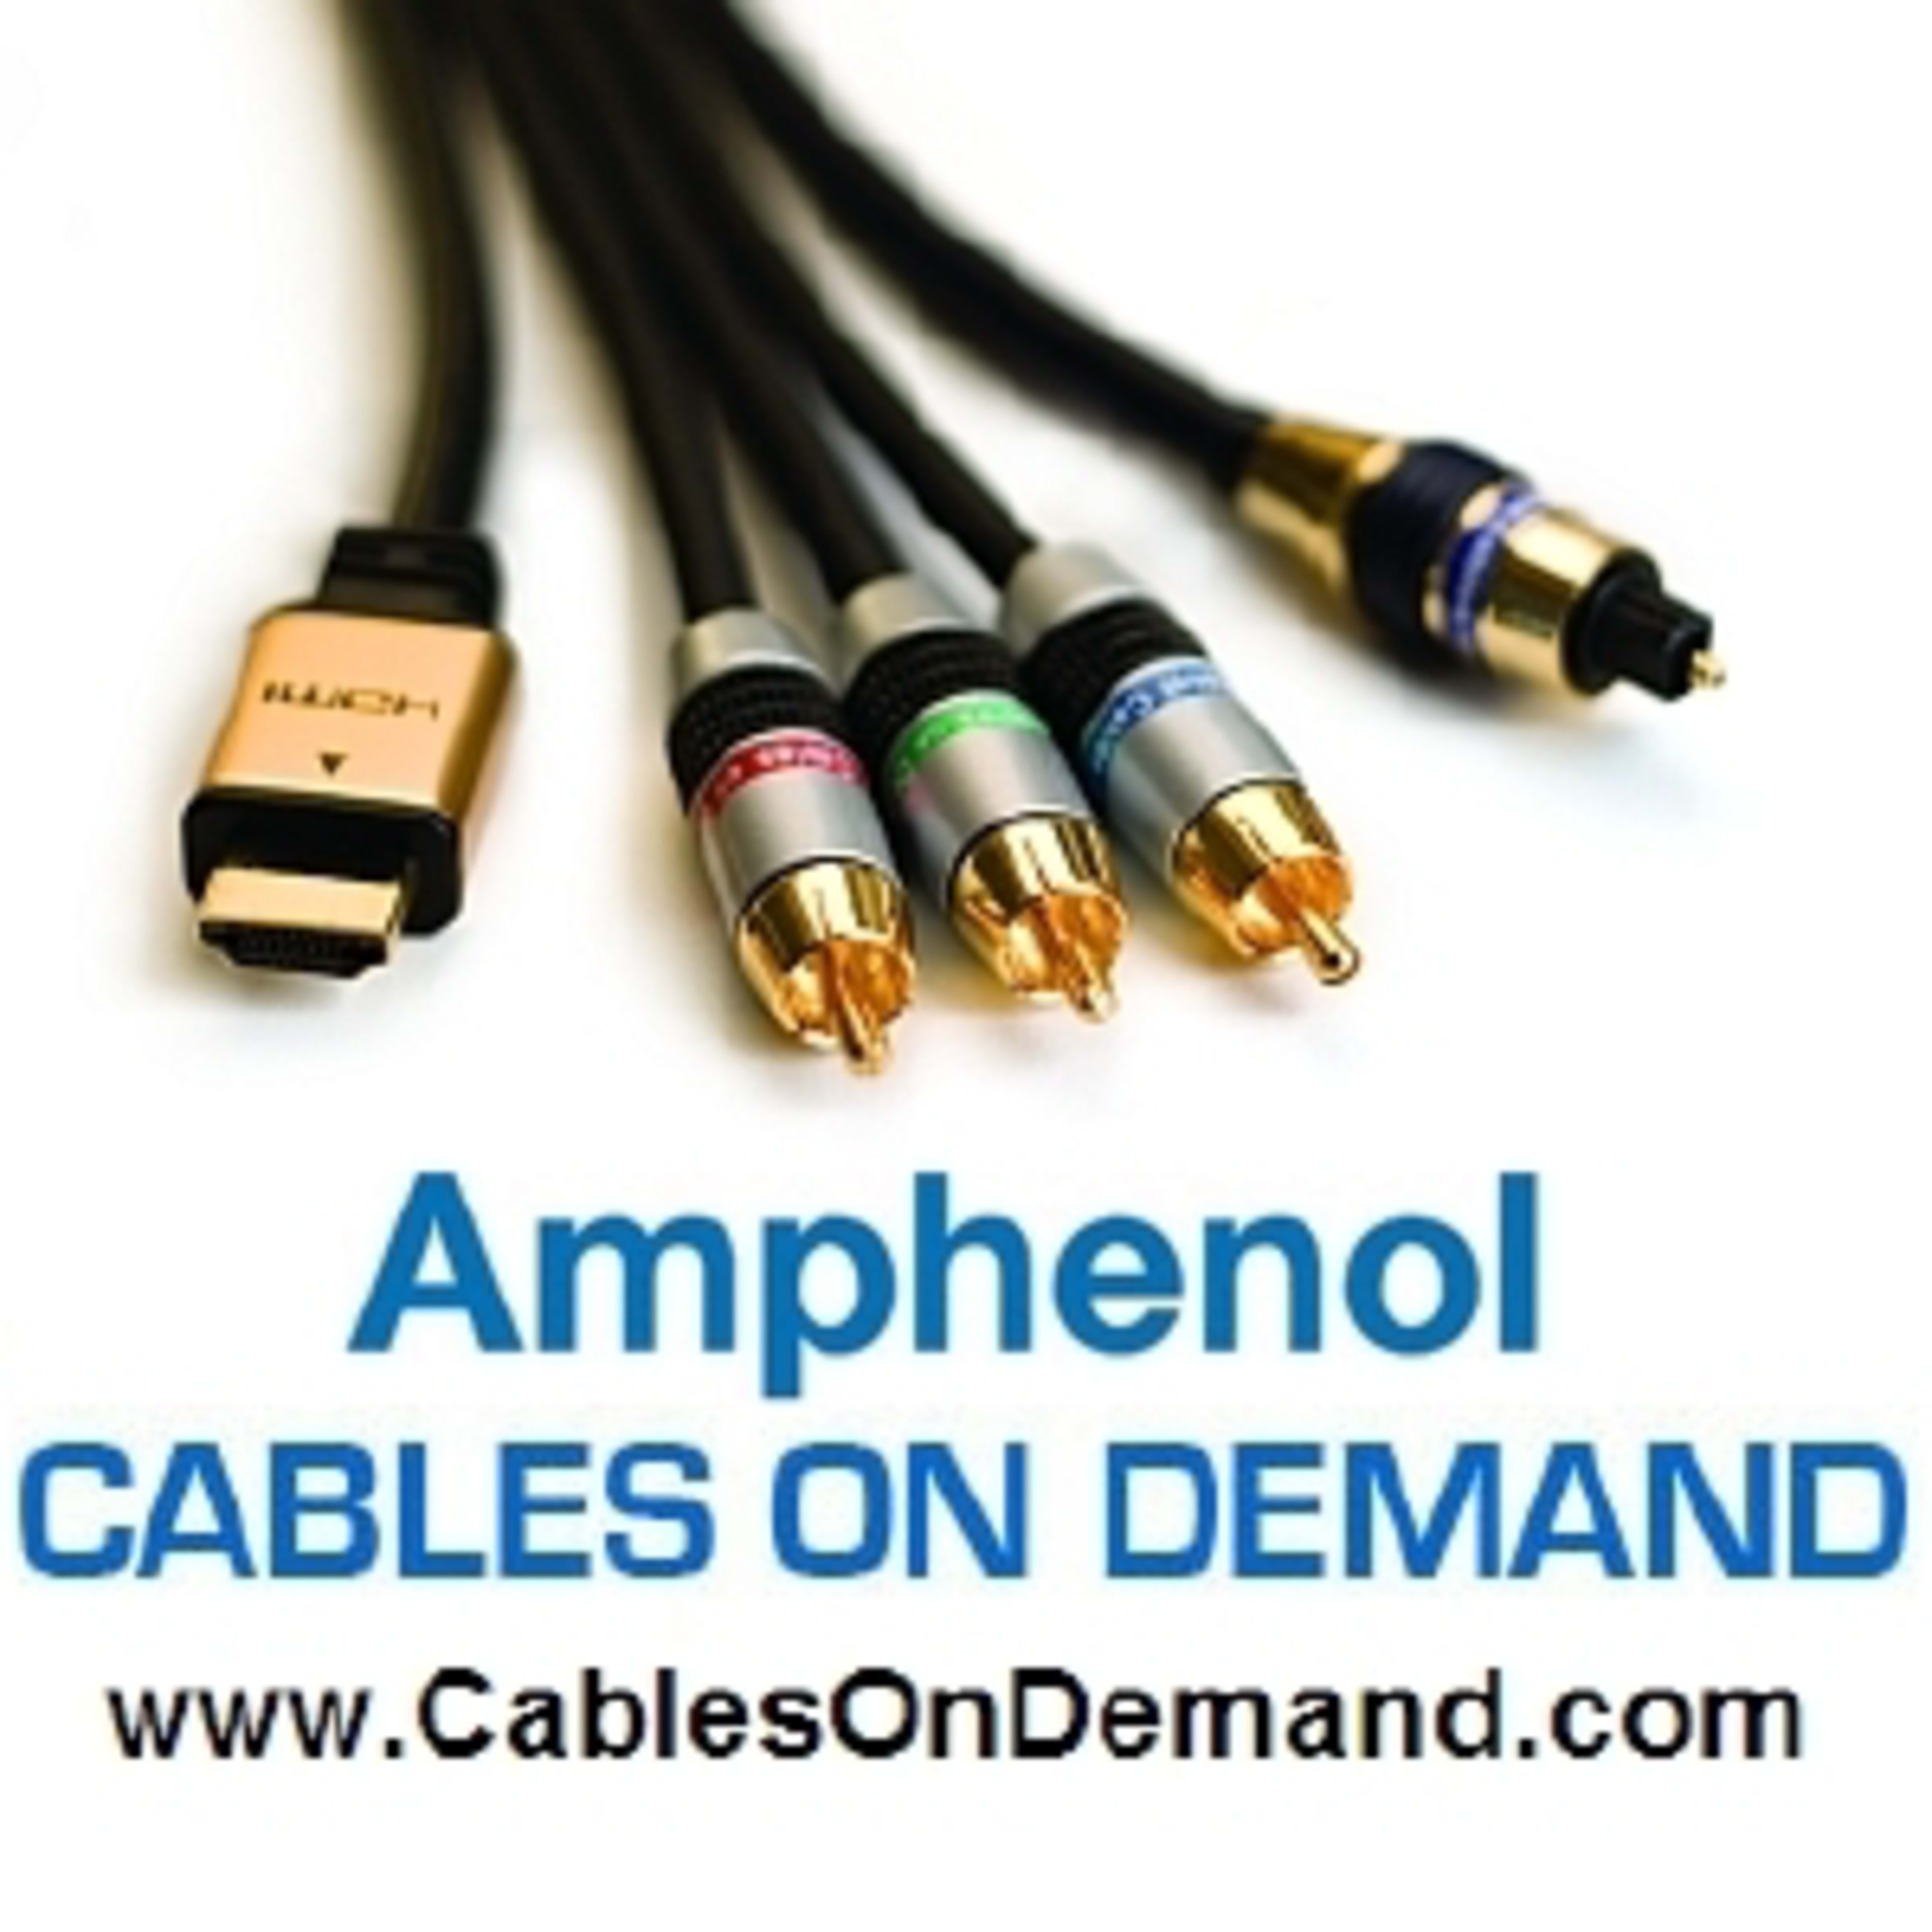 Cables On DemandCode